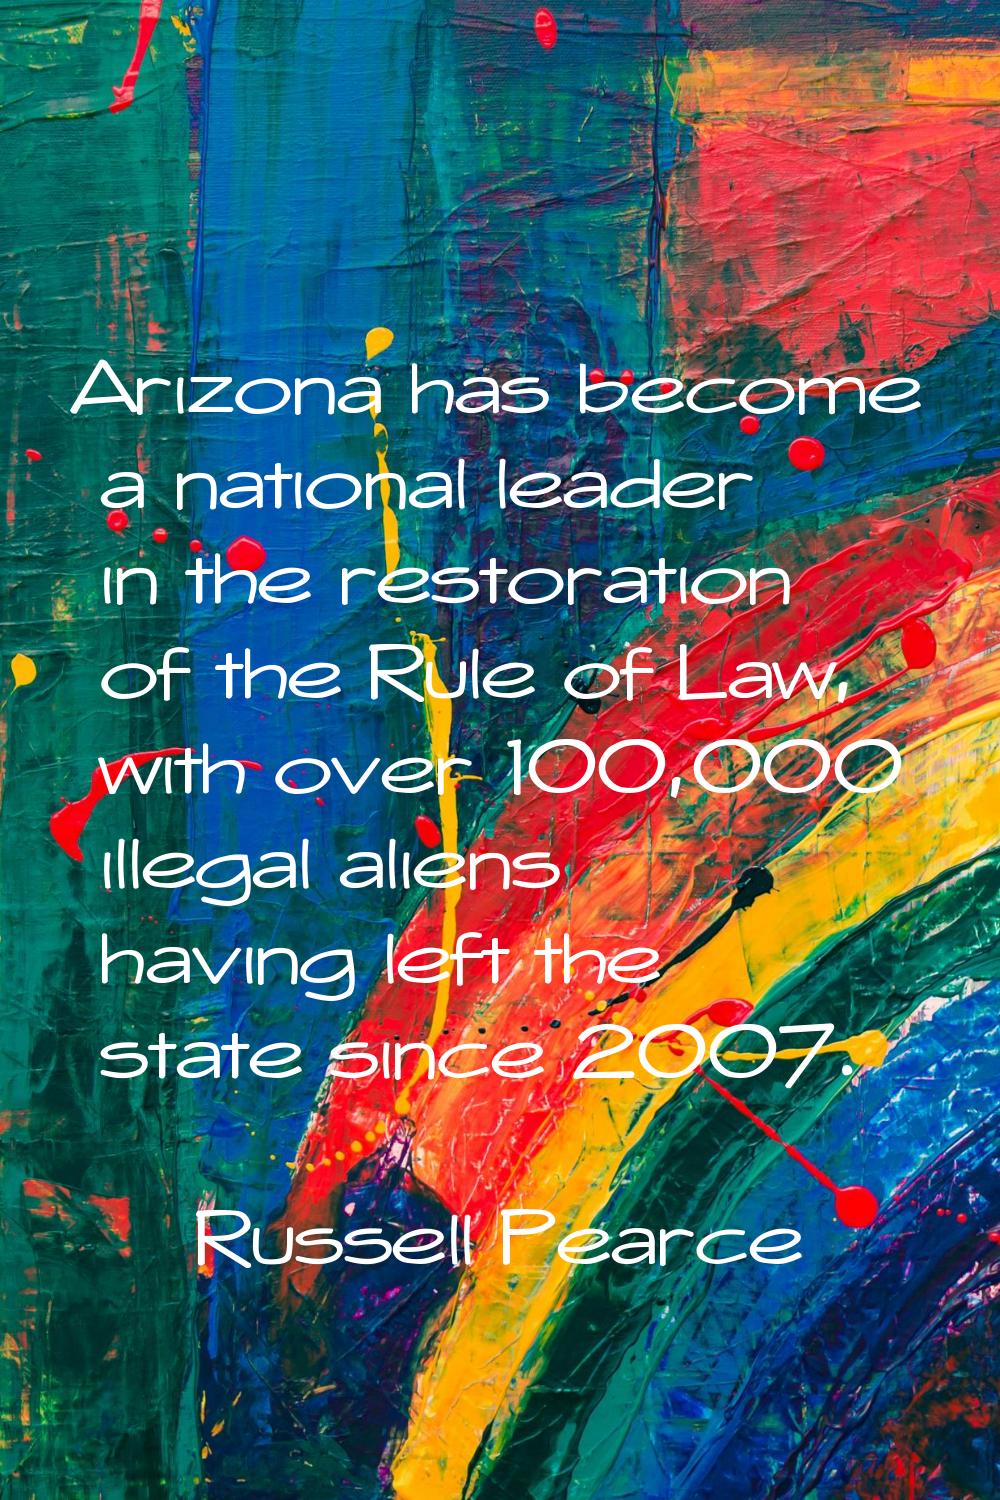 Arizona has become a national leader in the restoration of the Rule of Law, with over 100,000 illeg